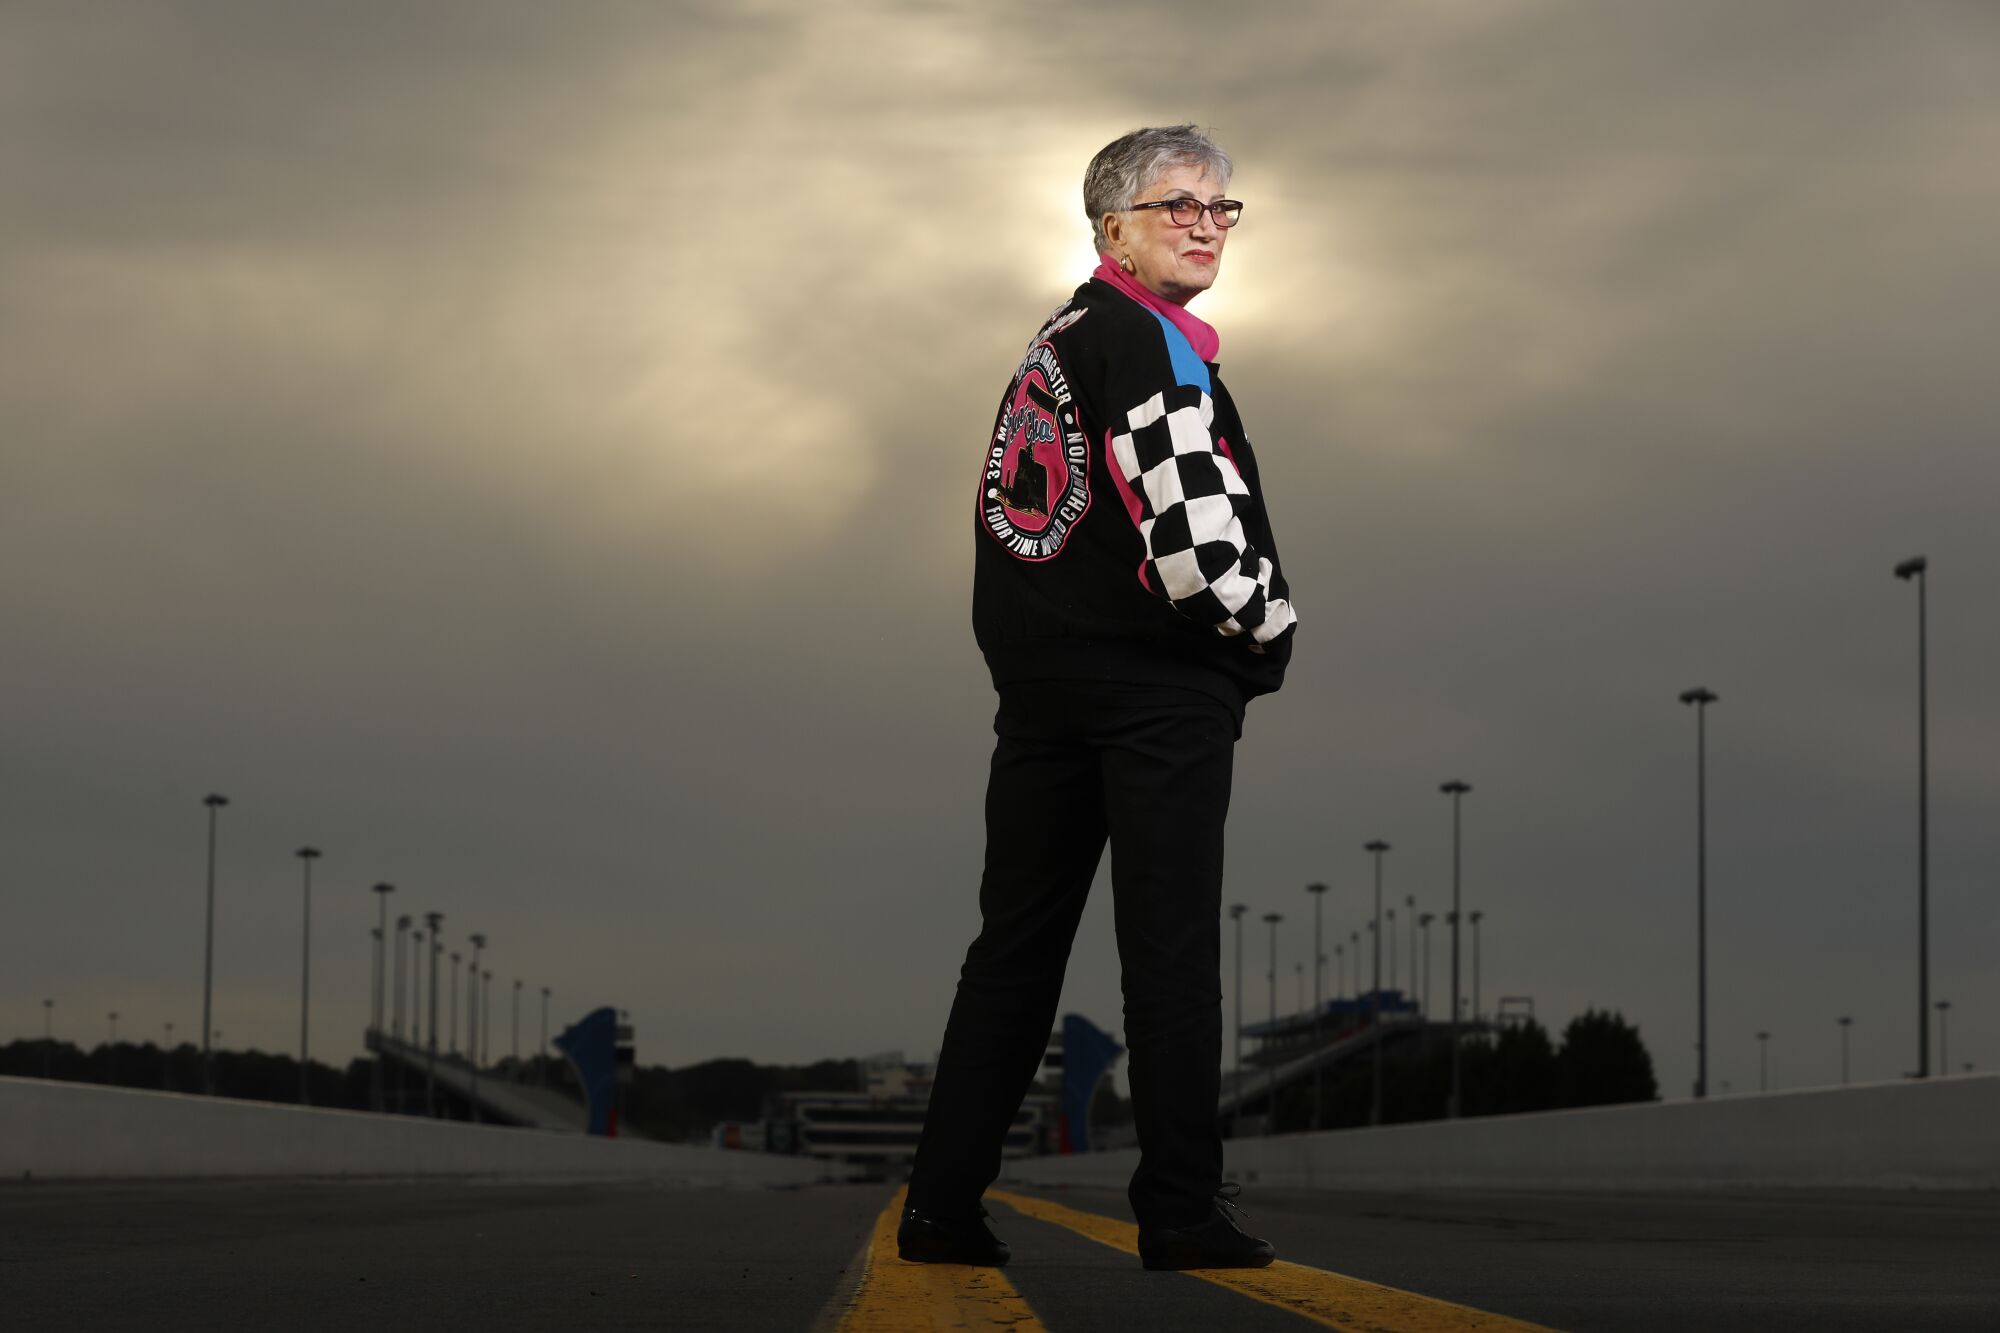 Shirley Muldowney, photographed at zMAX Dragway in Concord, N.C., won 18 national events in the National Hot Rod Assn.’s premier top-fuel class.